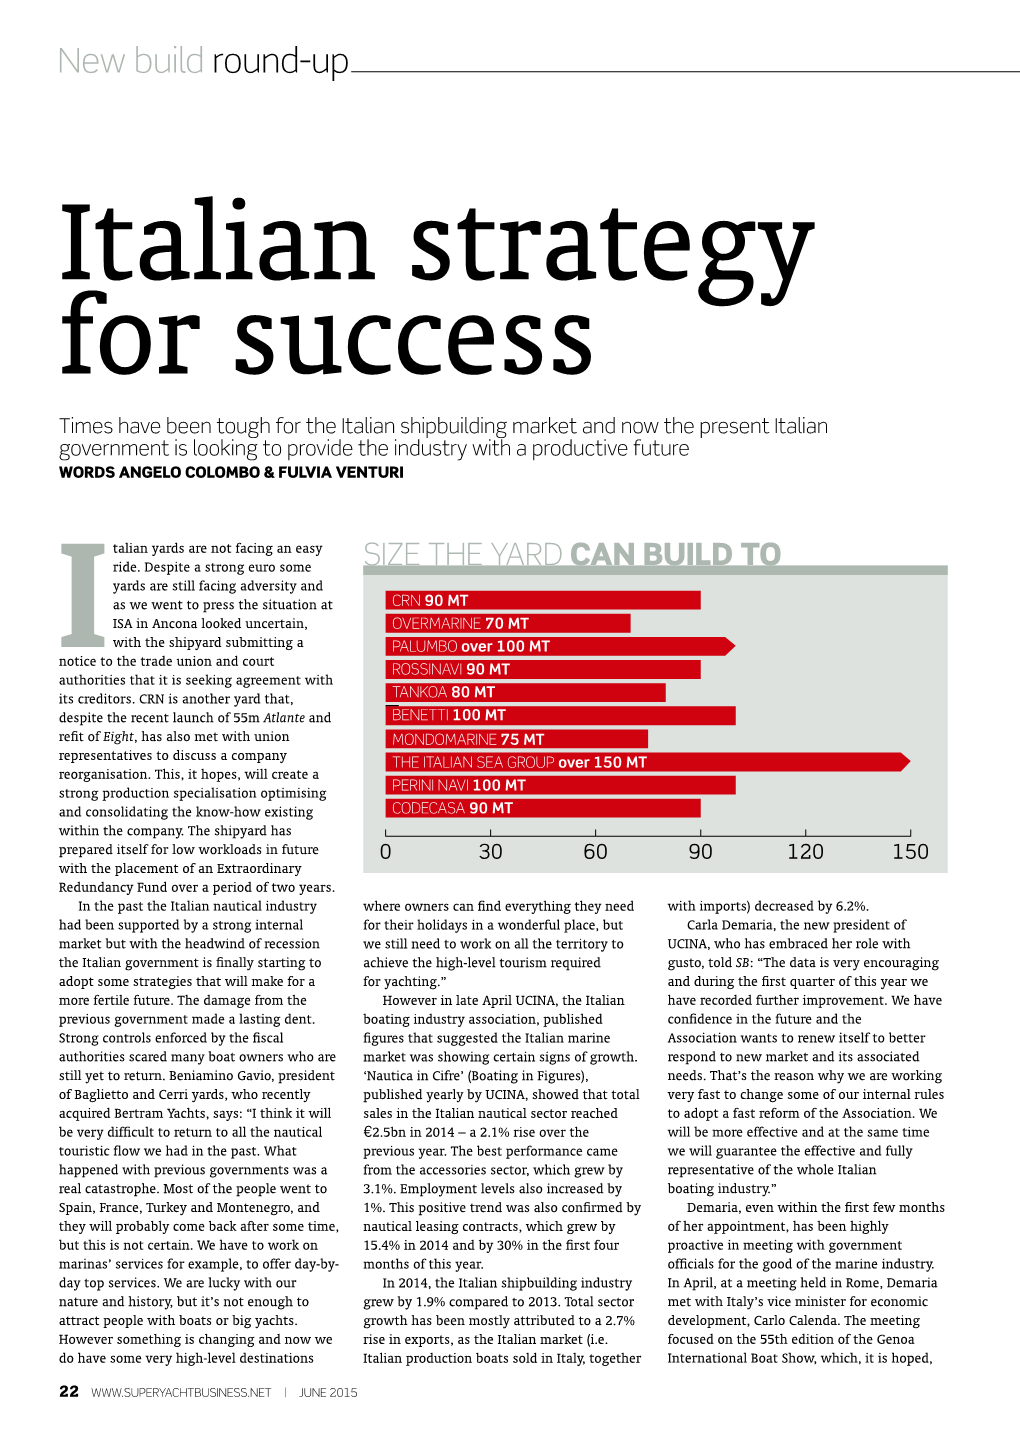 Italian Strategy for Success on Super Yacht Business